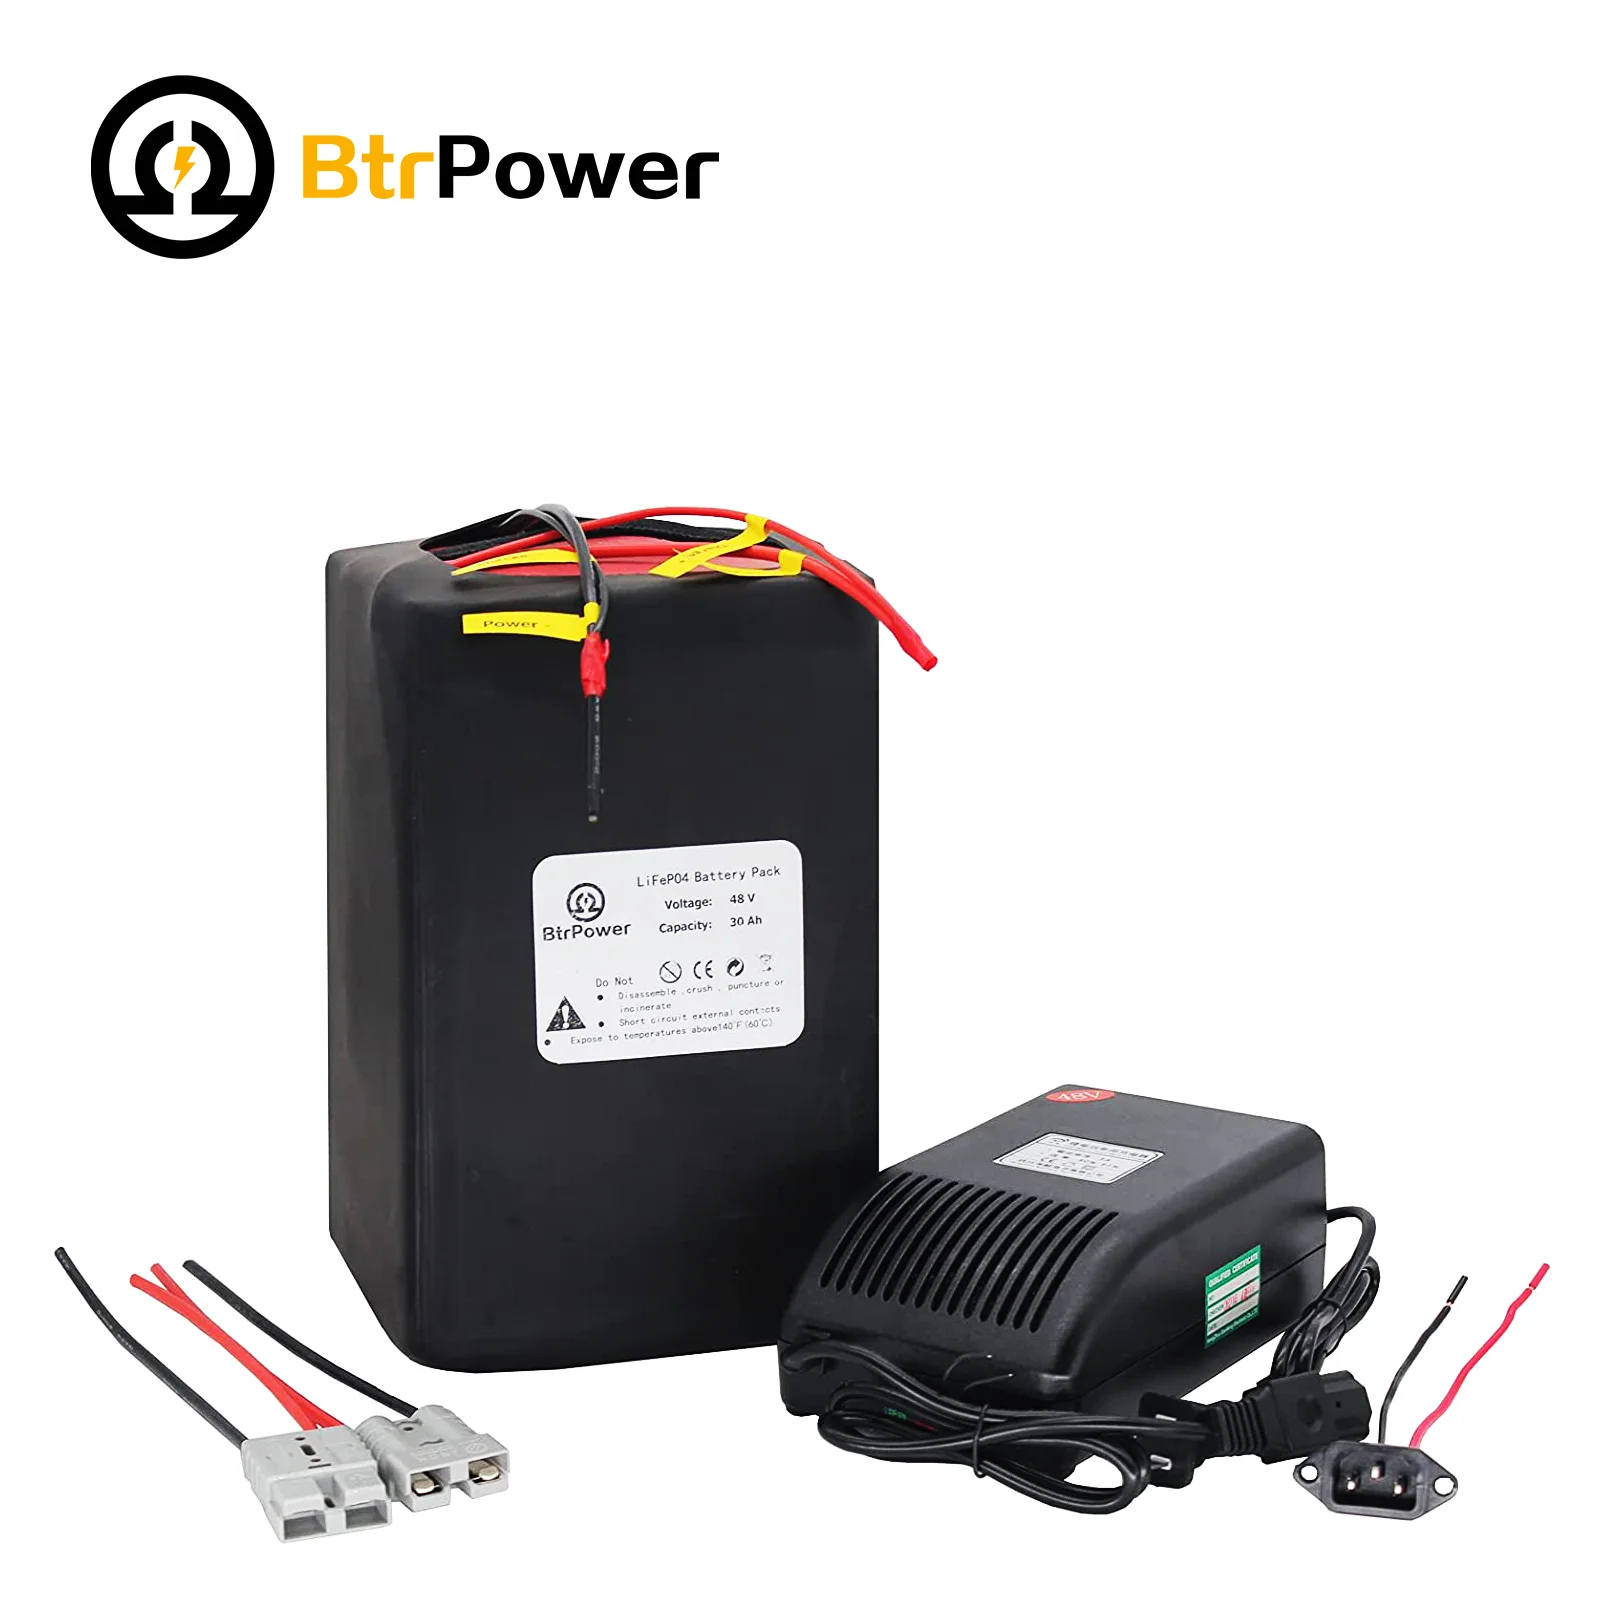 

48V 30A Lithium Battery Pack 12 V LiFePO4 Battery with 50A BMS Perfect for RV Power Outage Emergency Bicycle Battery